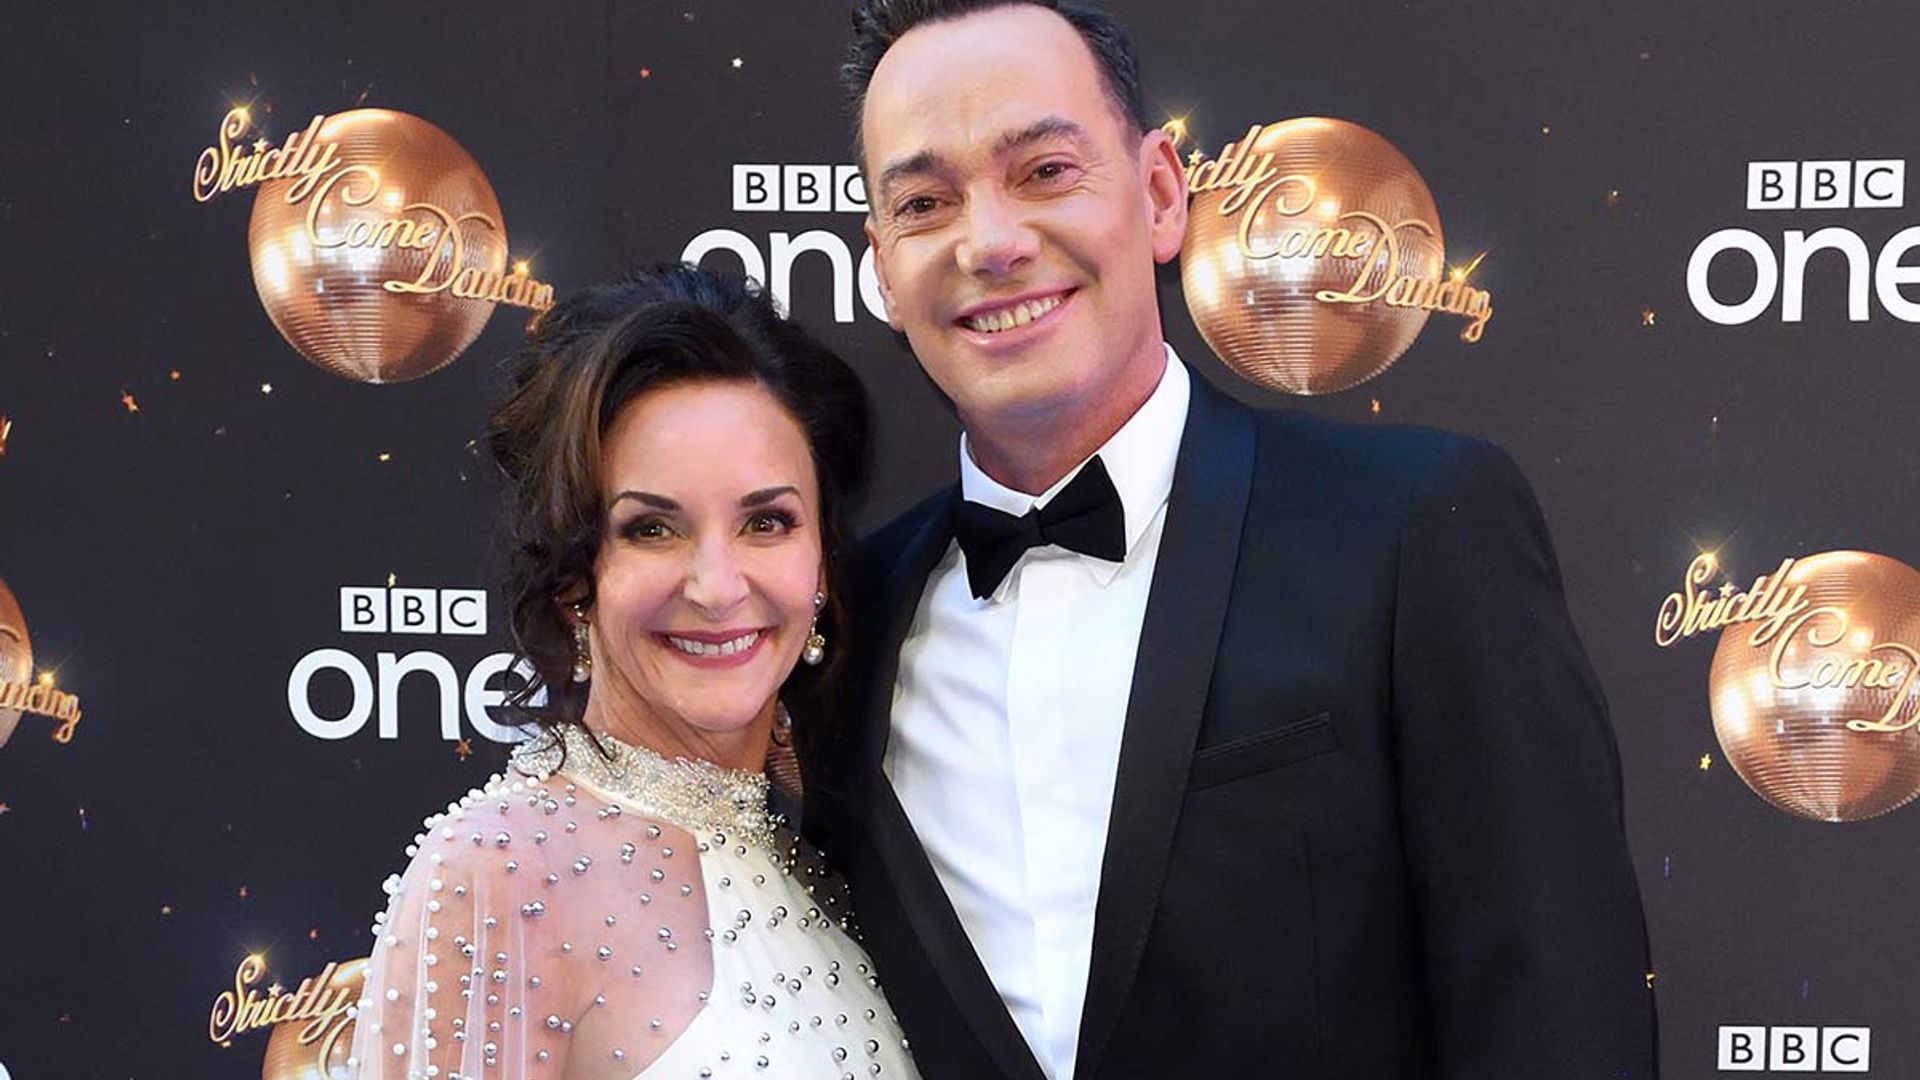 Shirley Ballas reveals heated row with Craig Revel Horwood over hurtful comments